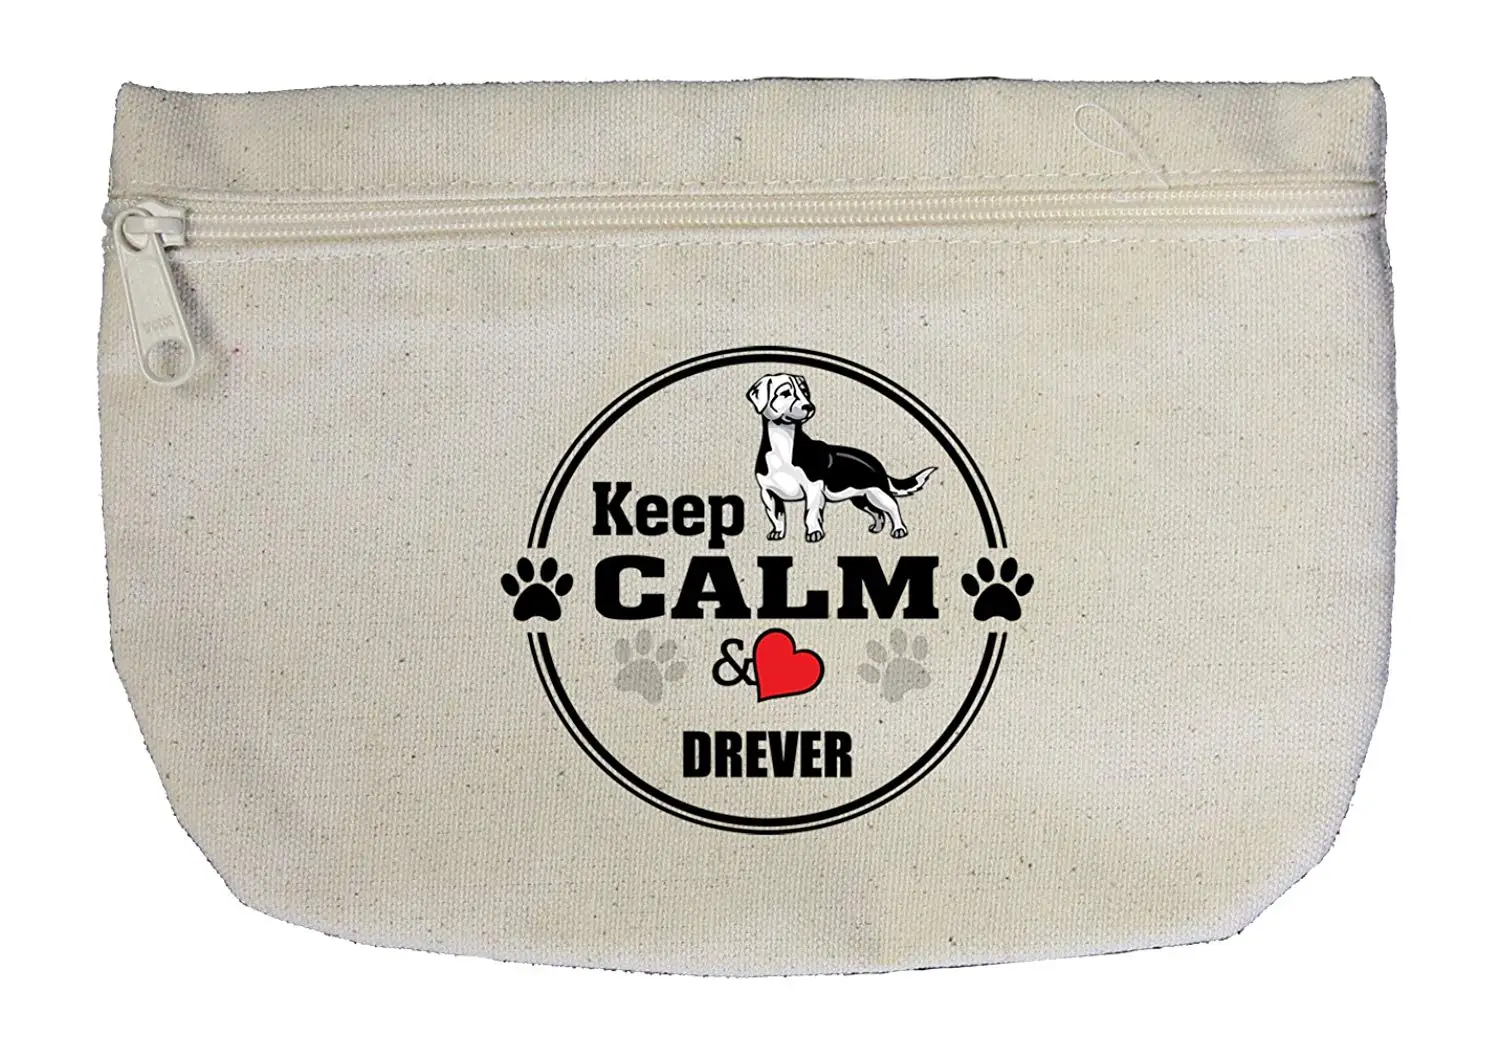 Buy Canvas Zipper Pouch Makeup Bag Keep Calm Love Drever Dog Style In Print In Cheap Price On Alibaba Com